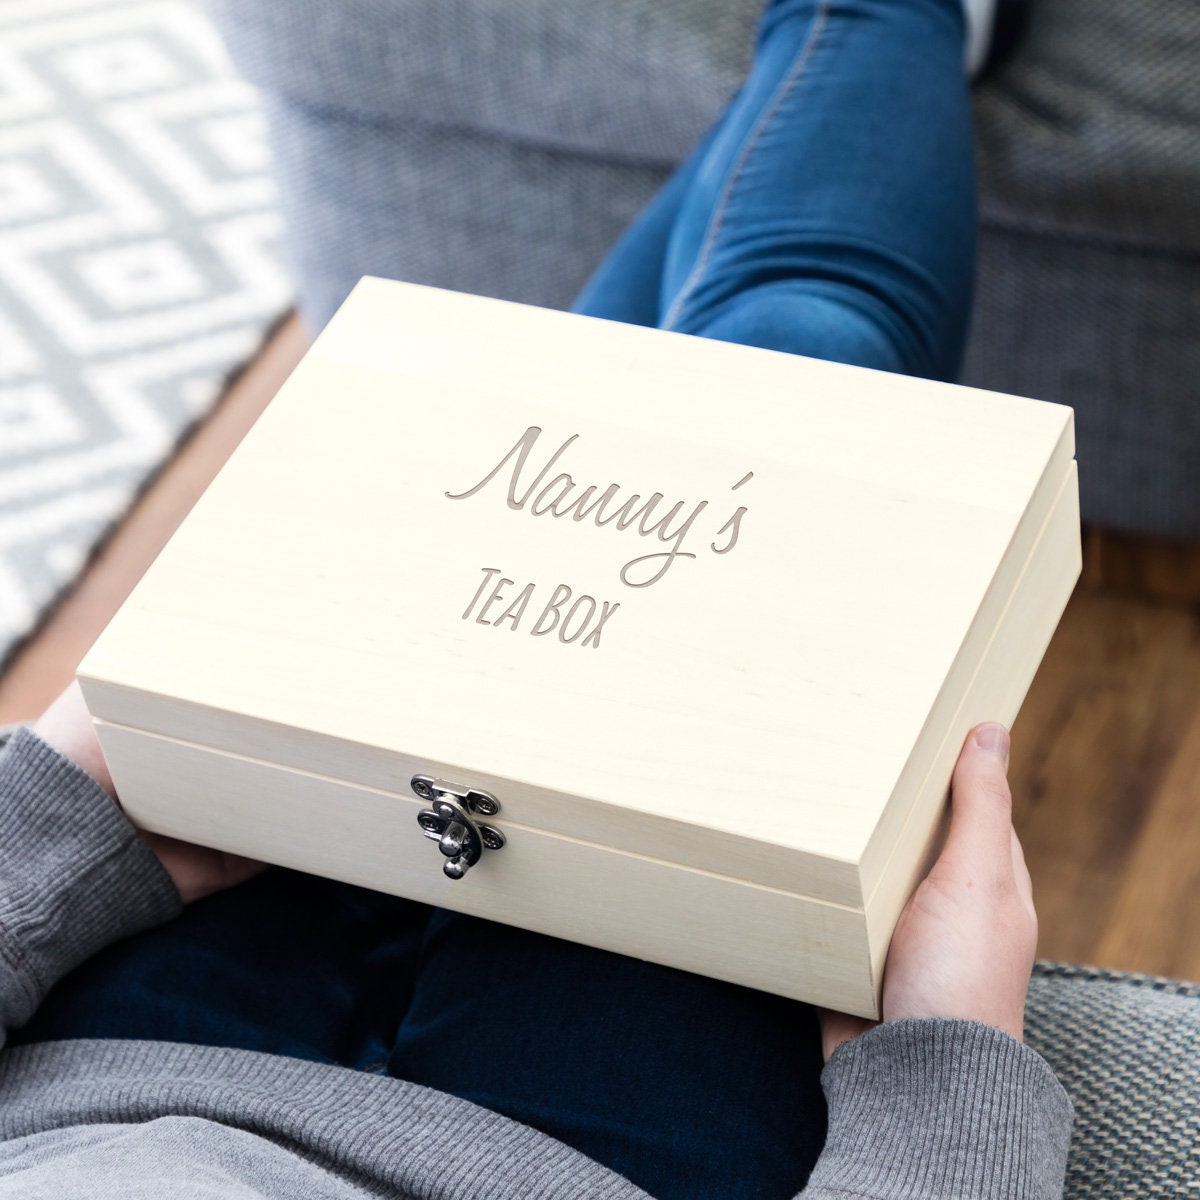 Tea Box Personalised Tea Box With 6 Compartments Tea Box Wood Tea Gift  Gifts for Her Gift for Nanny Gift for Grandma LC373 -  Denmark